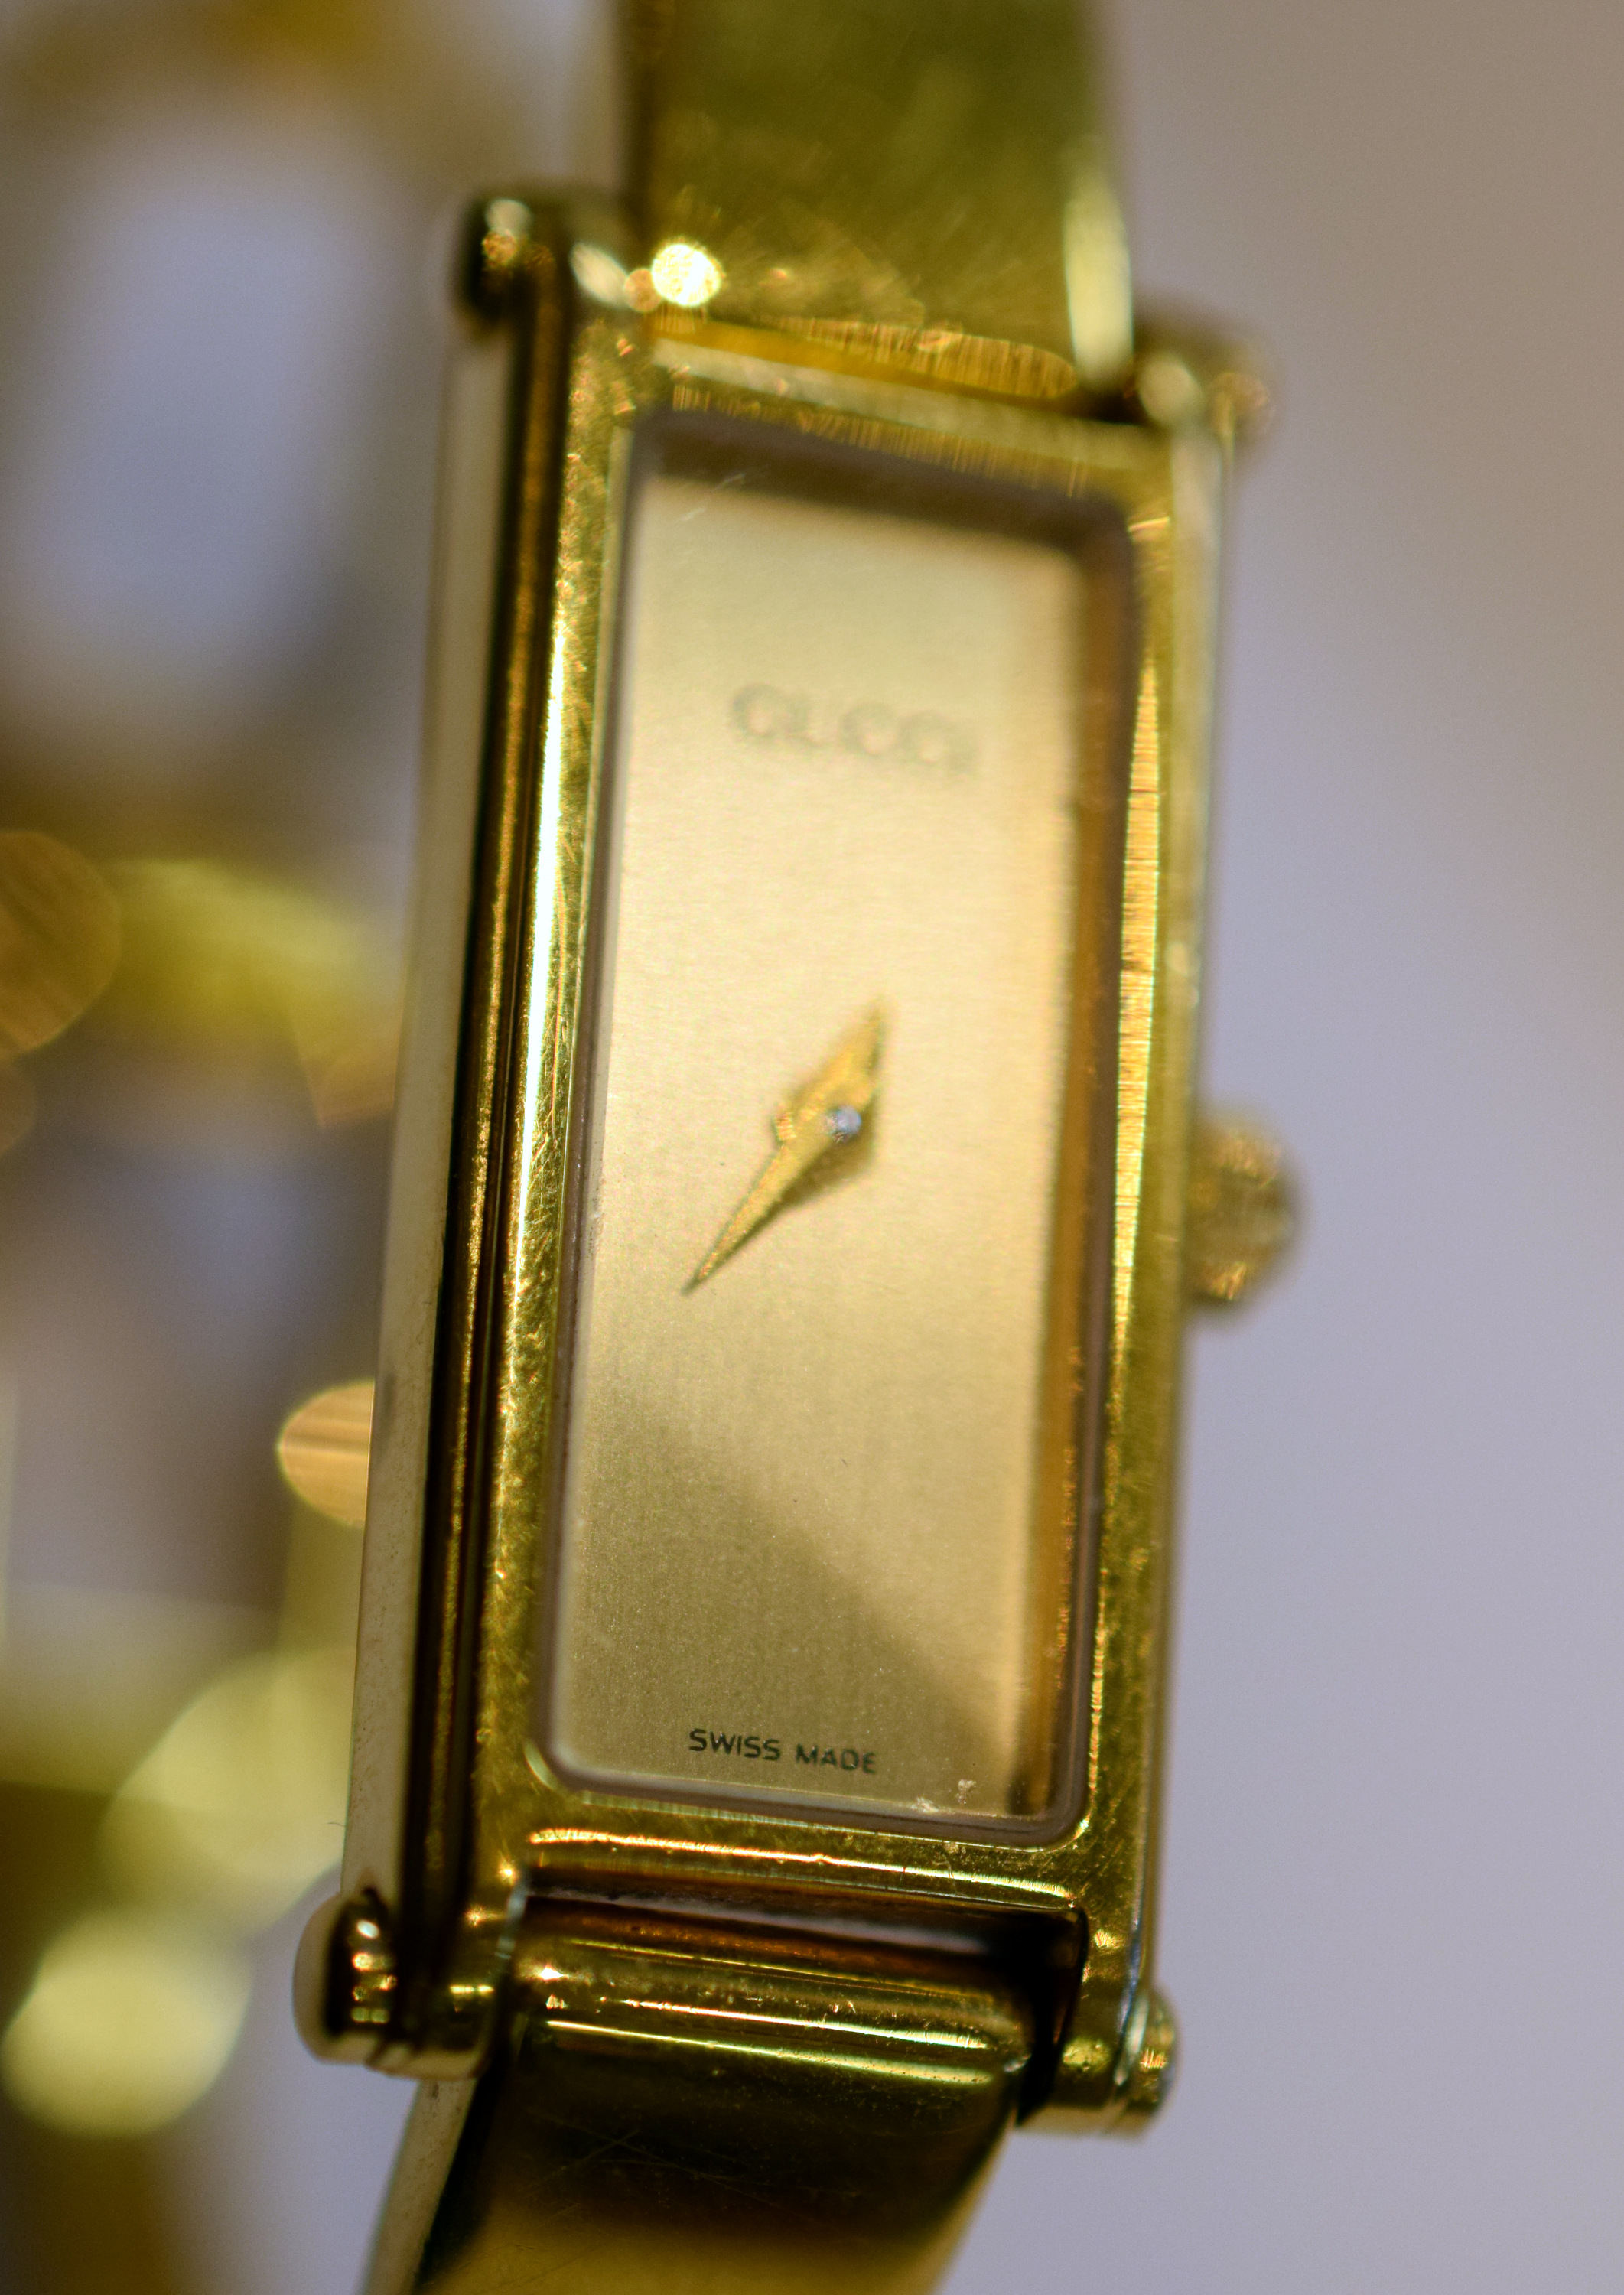 Gucci Lady's Cocktail Watch On Bracelet - Image 4 of 6